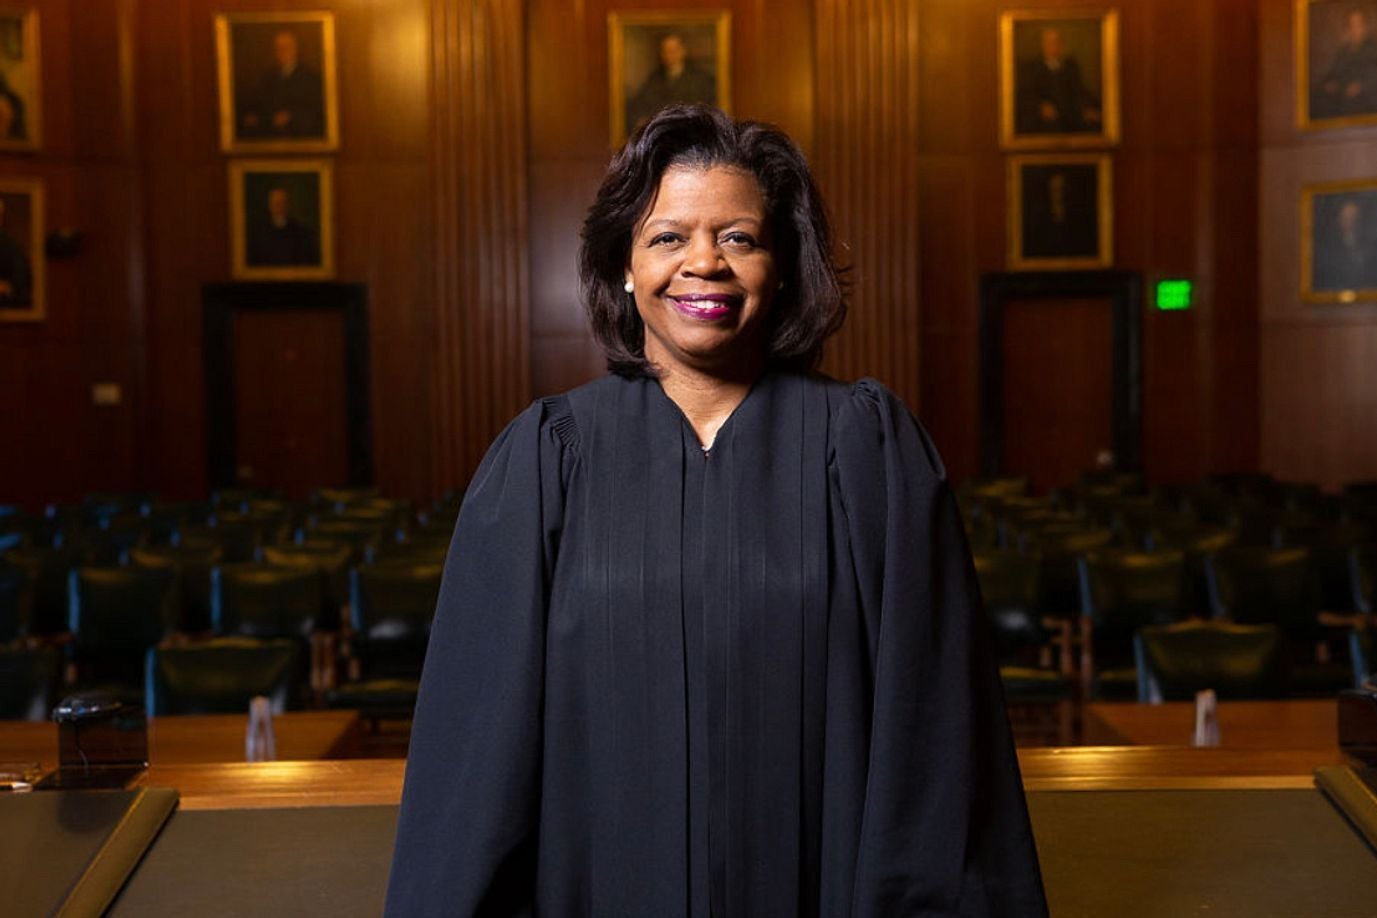 Cheri Beasley smiling in her robes, standing in a courtroom.